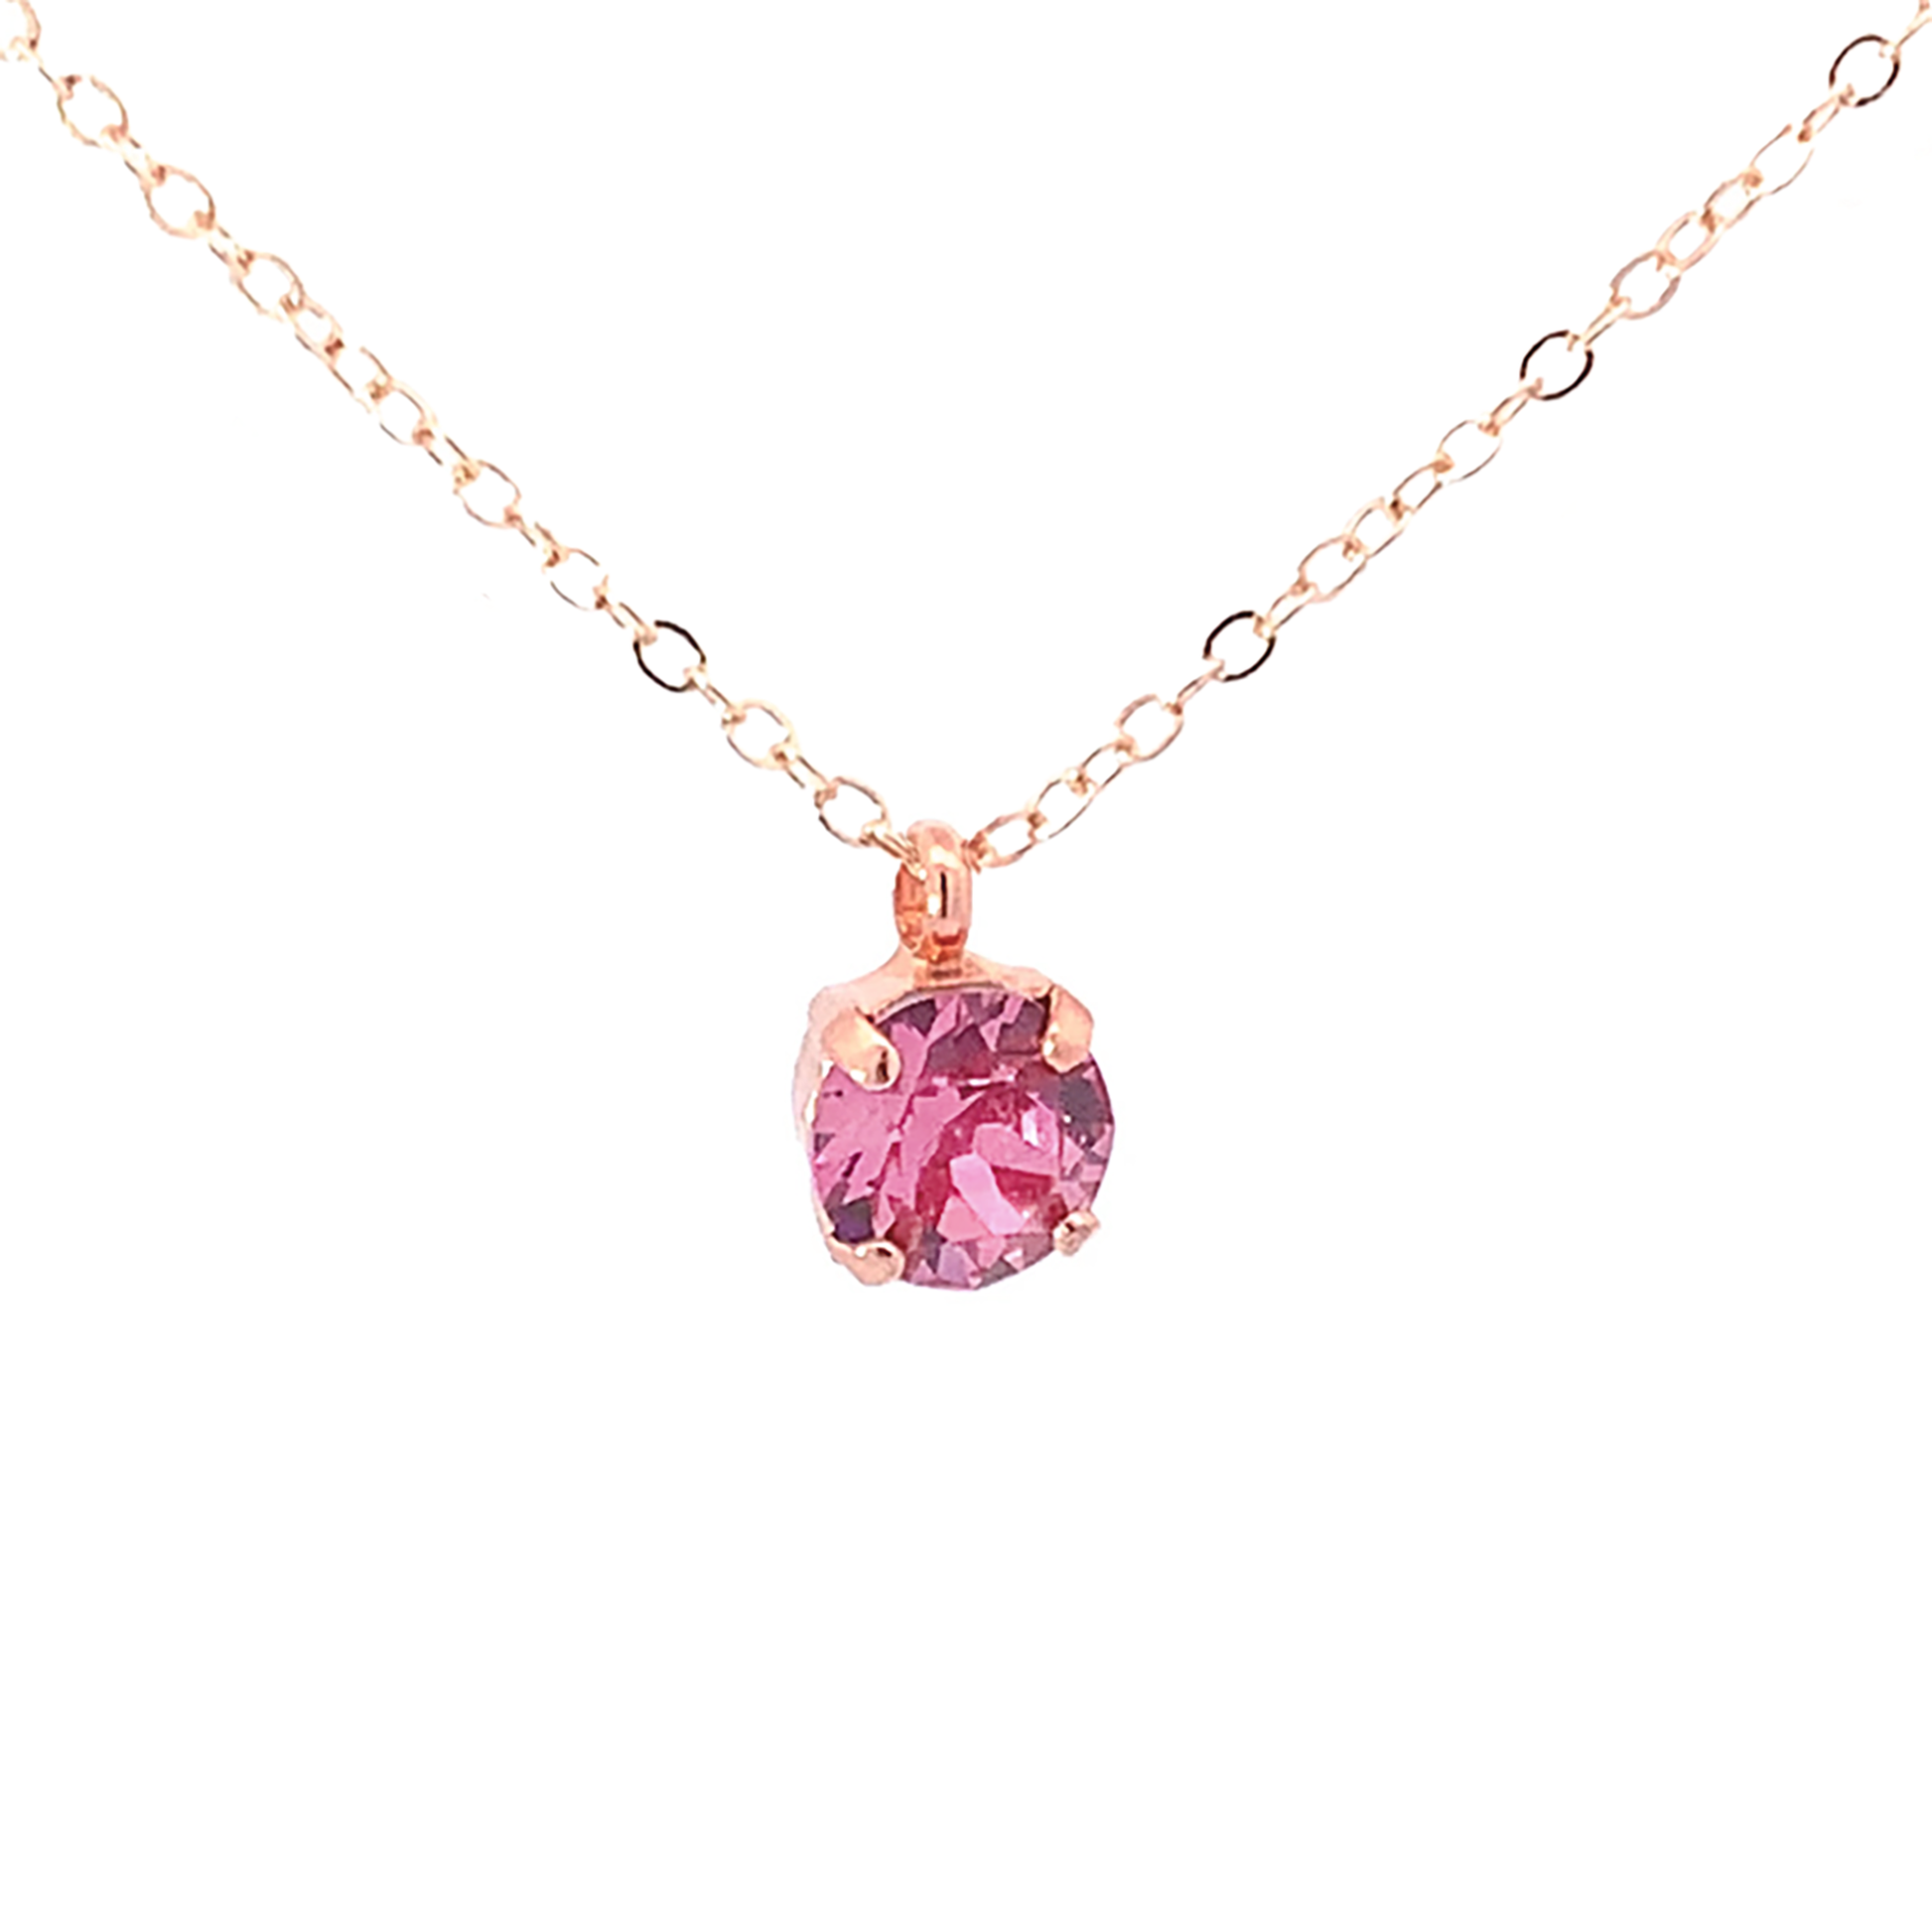 pink tourmaline solitaire pendant necklace rose gold